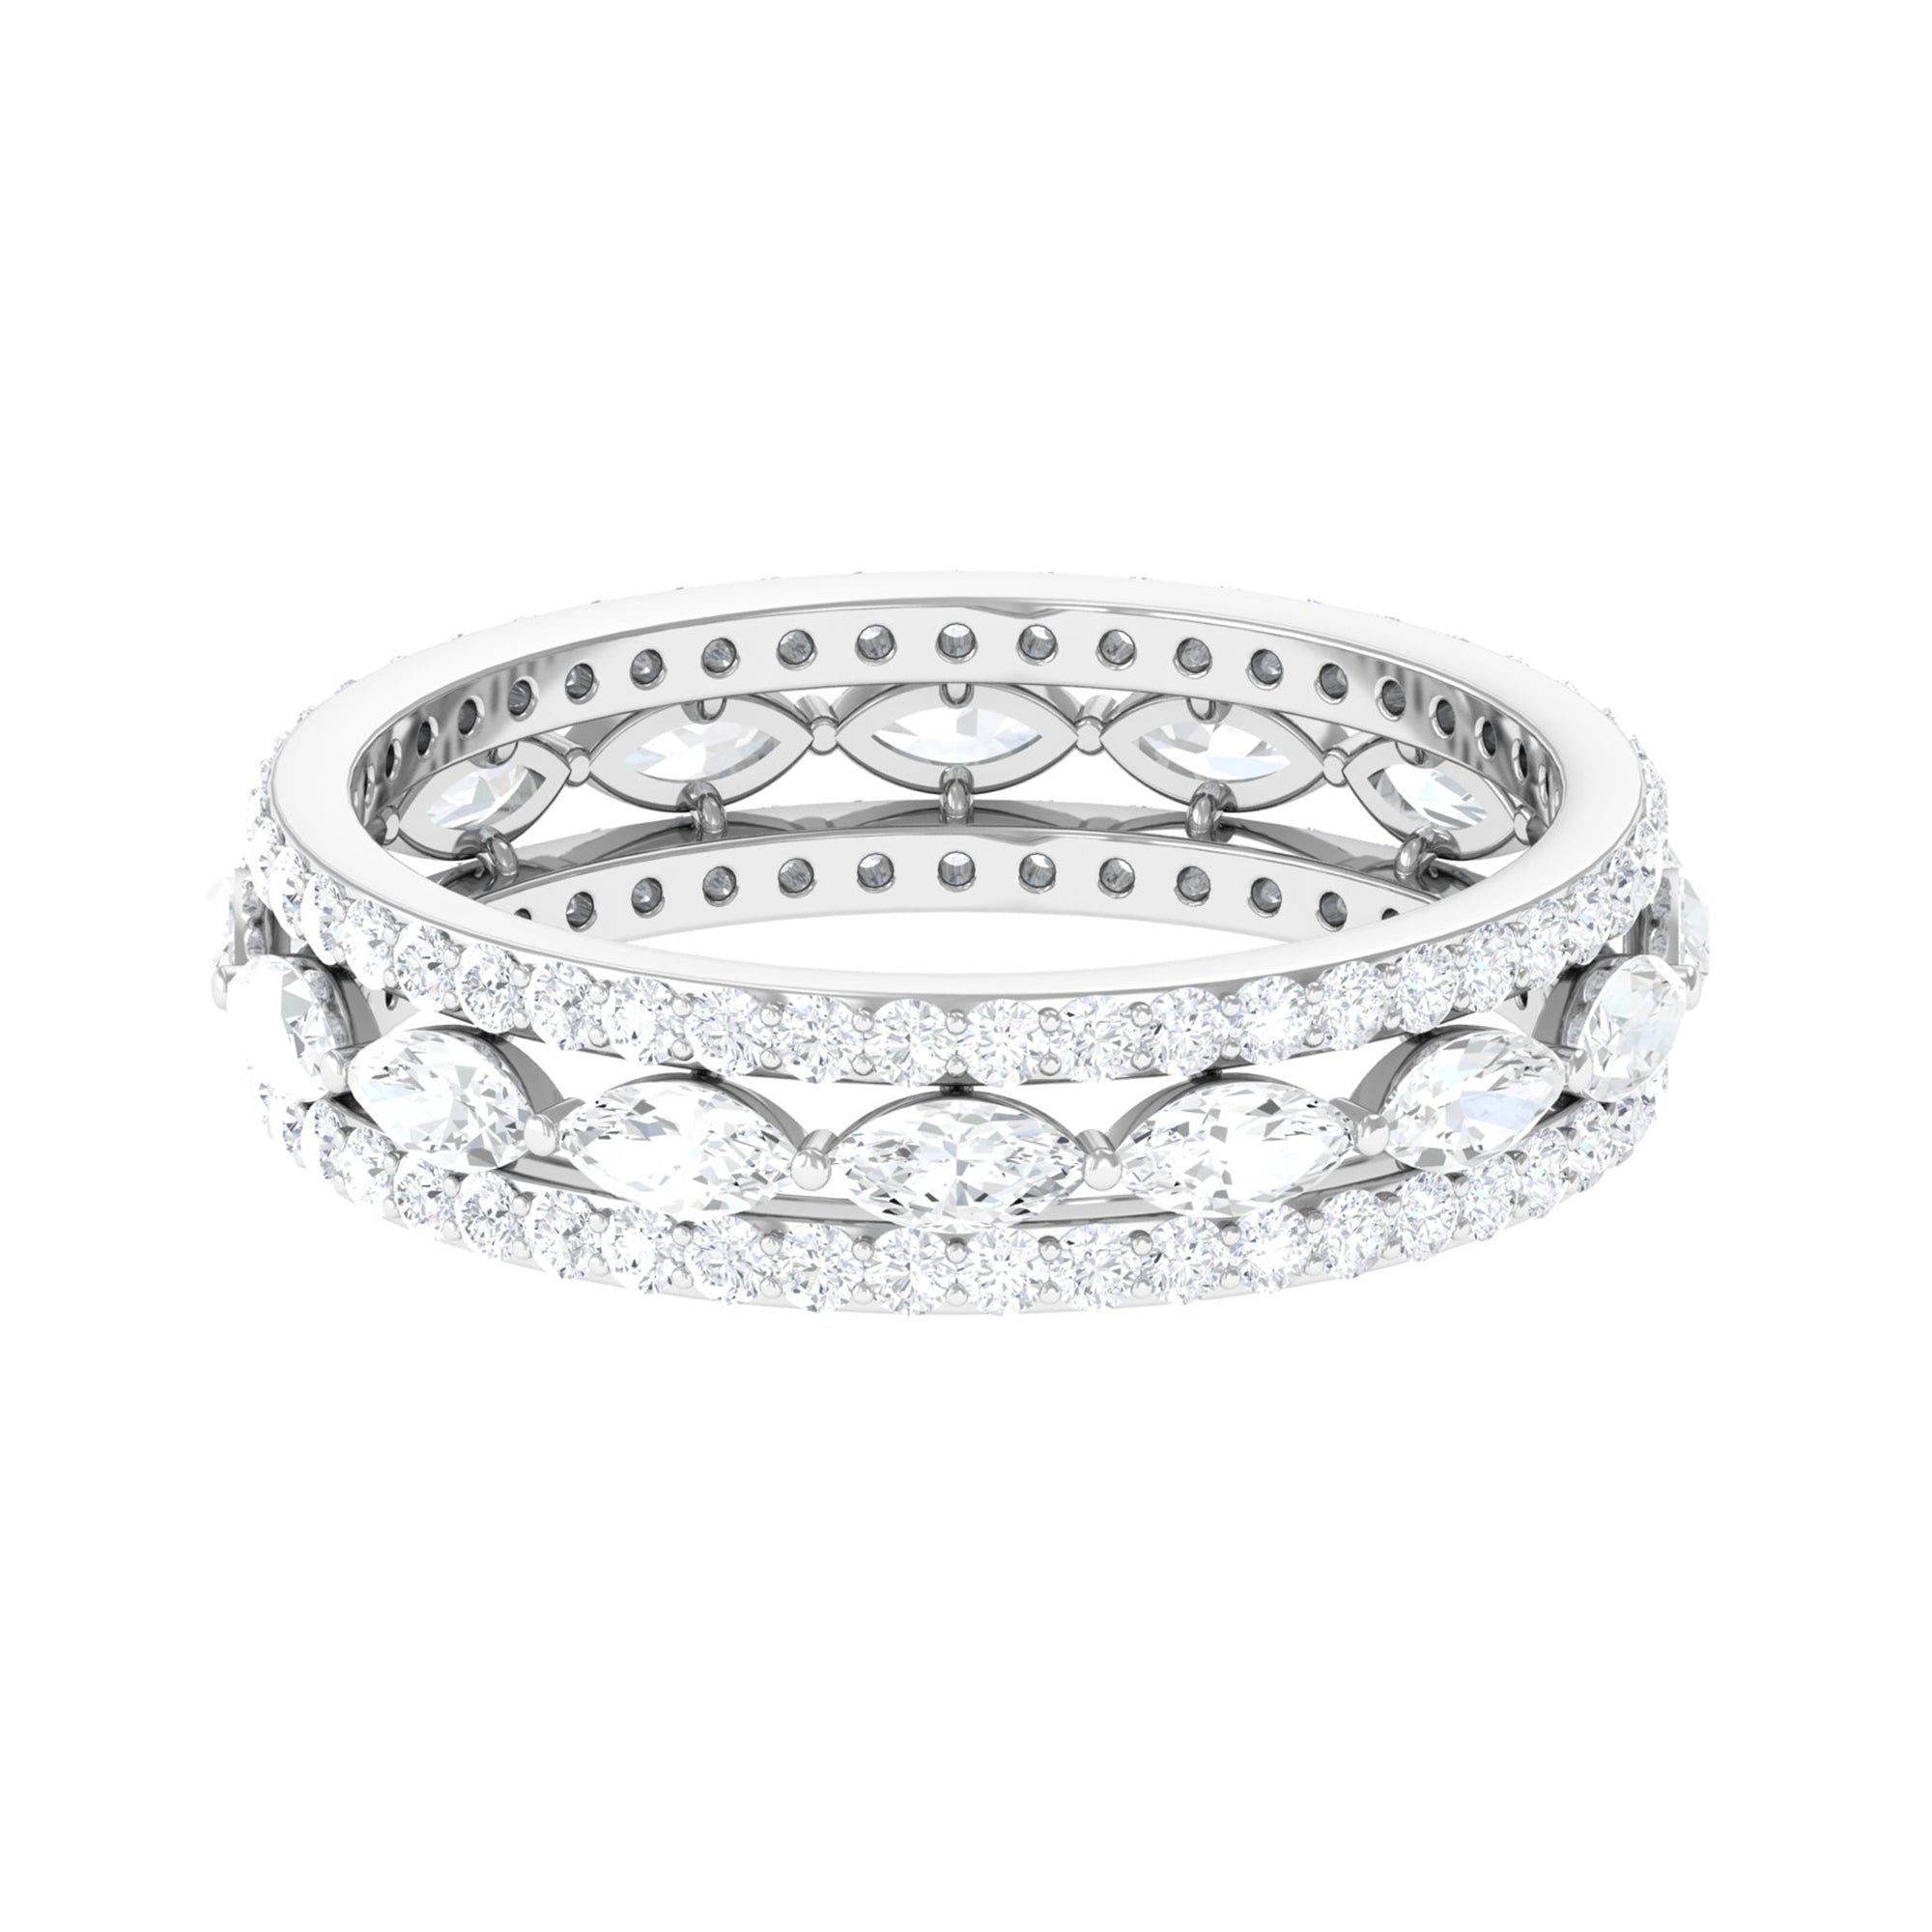 2.25 CT Marquise and Round Cut Moissanite Wedding Band Moissanite - ( D-VS1 ) - Color and Clarity - Rosec Jewels